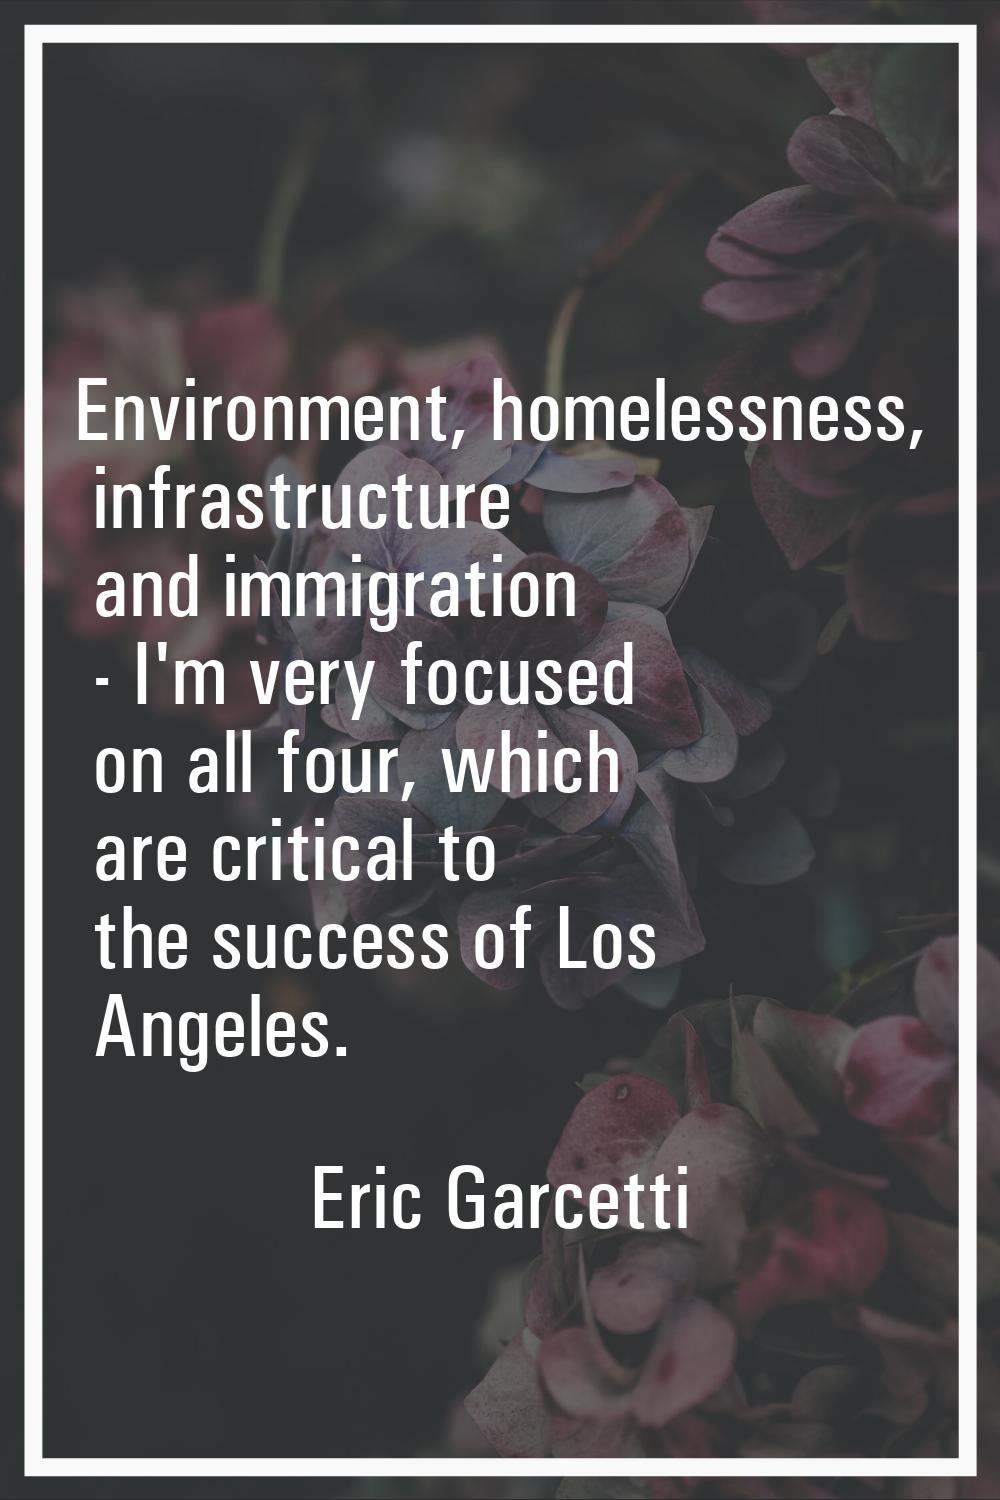 Environment, homelessness, infrastructure and immigration - I'm very focused on all four, which are